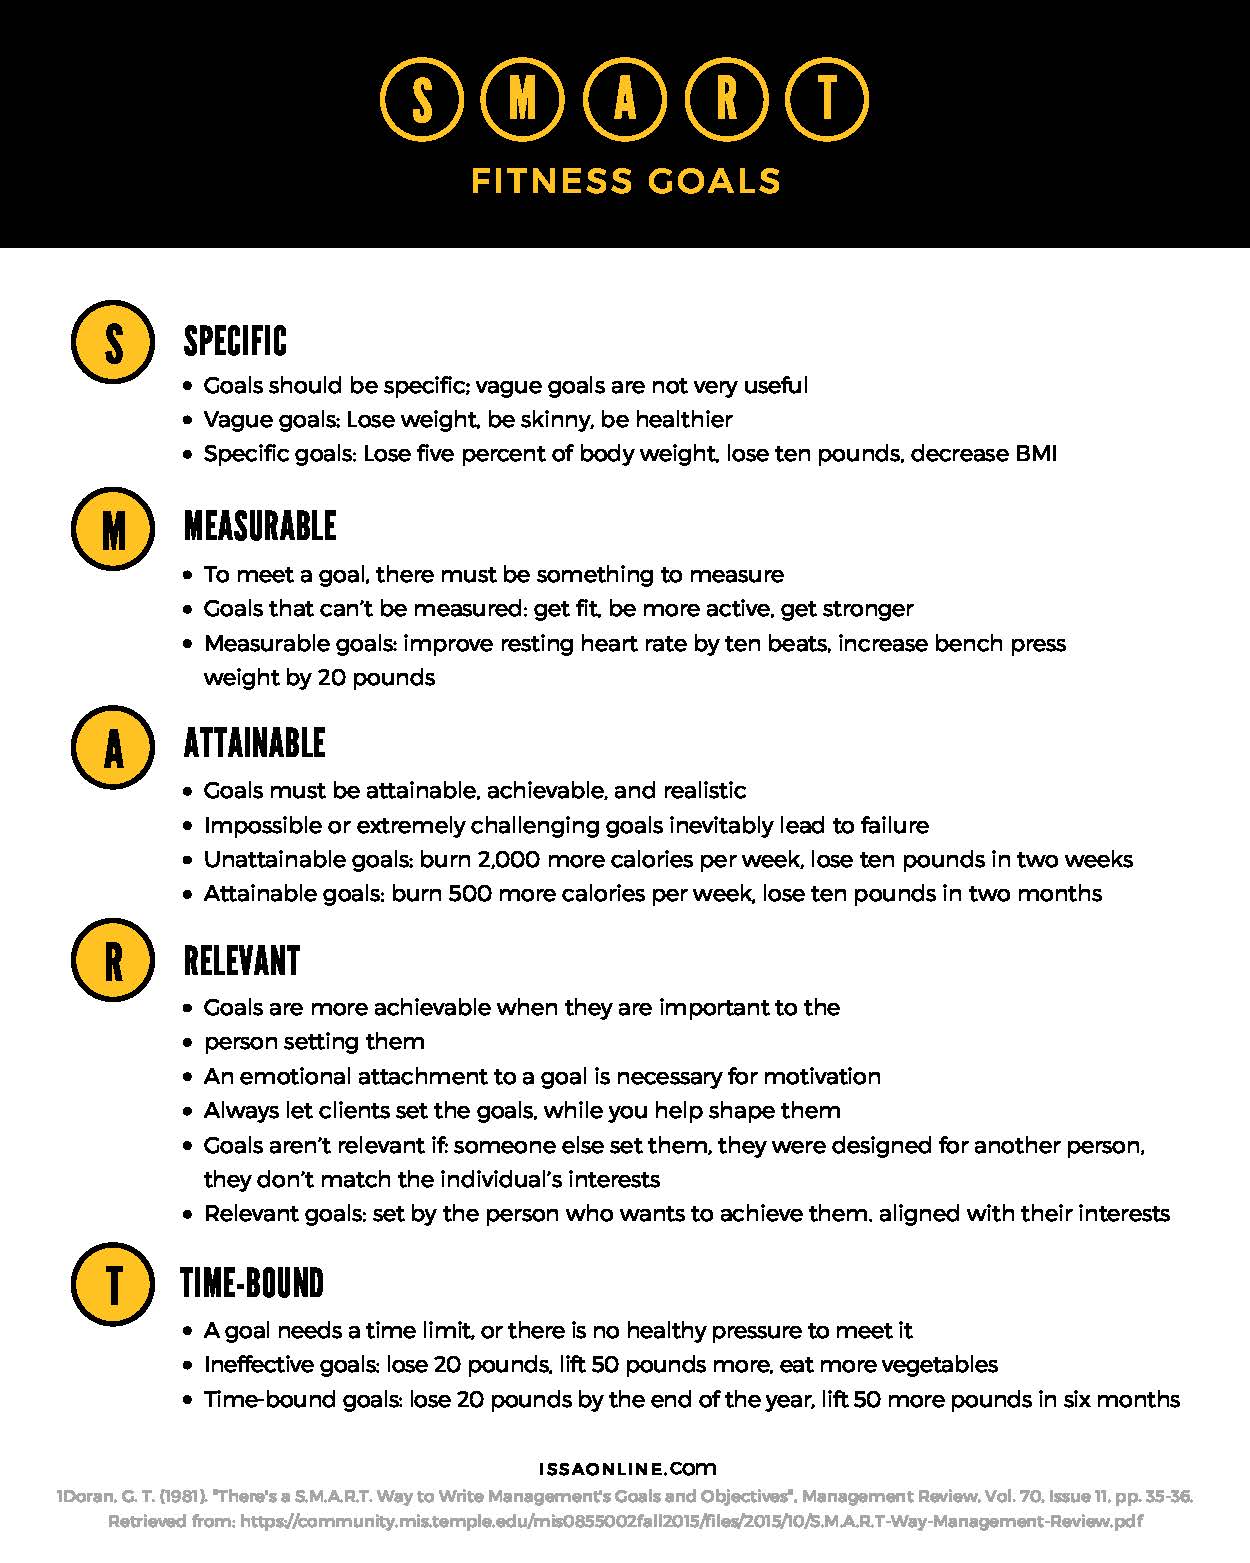 Tips to Set Realistic Fitness Goals You'll Actually Achieve